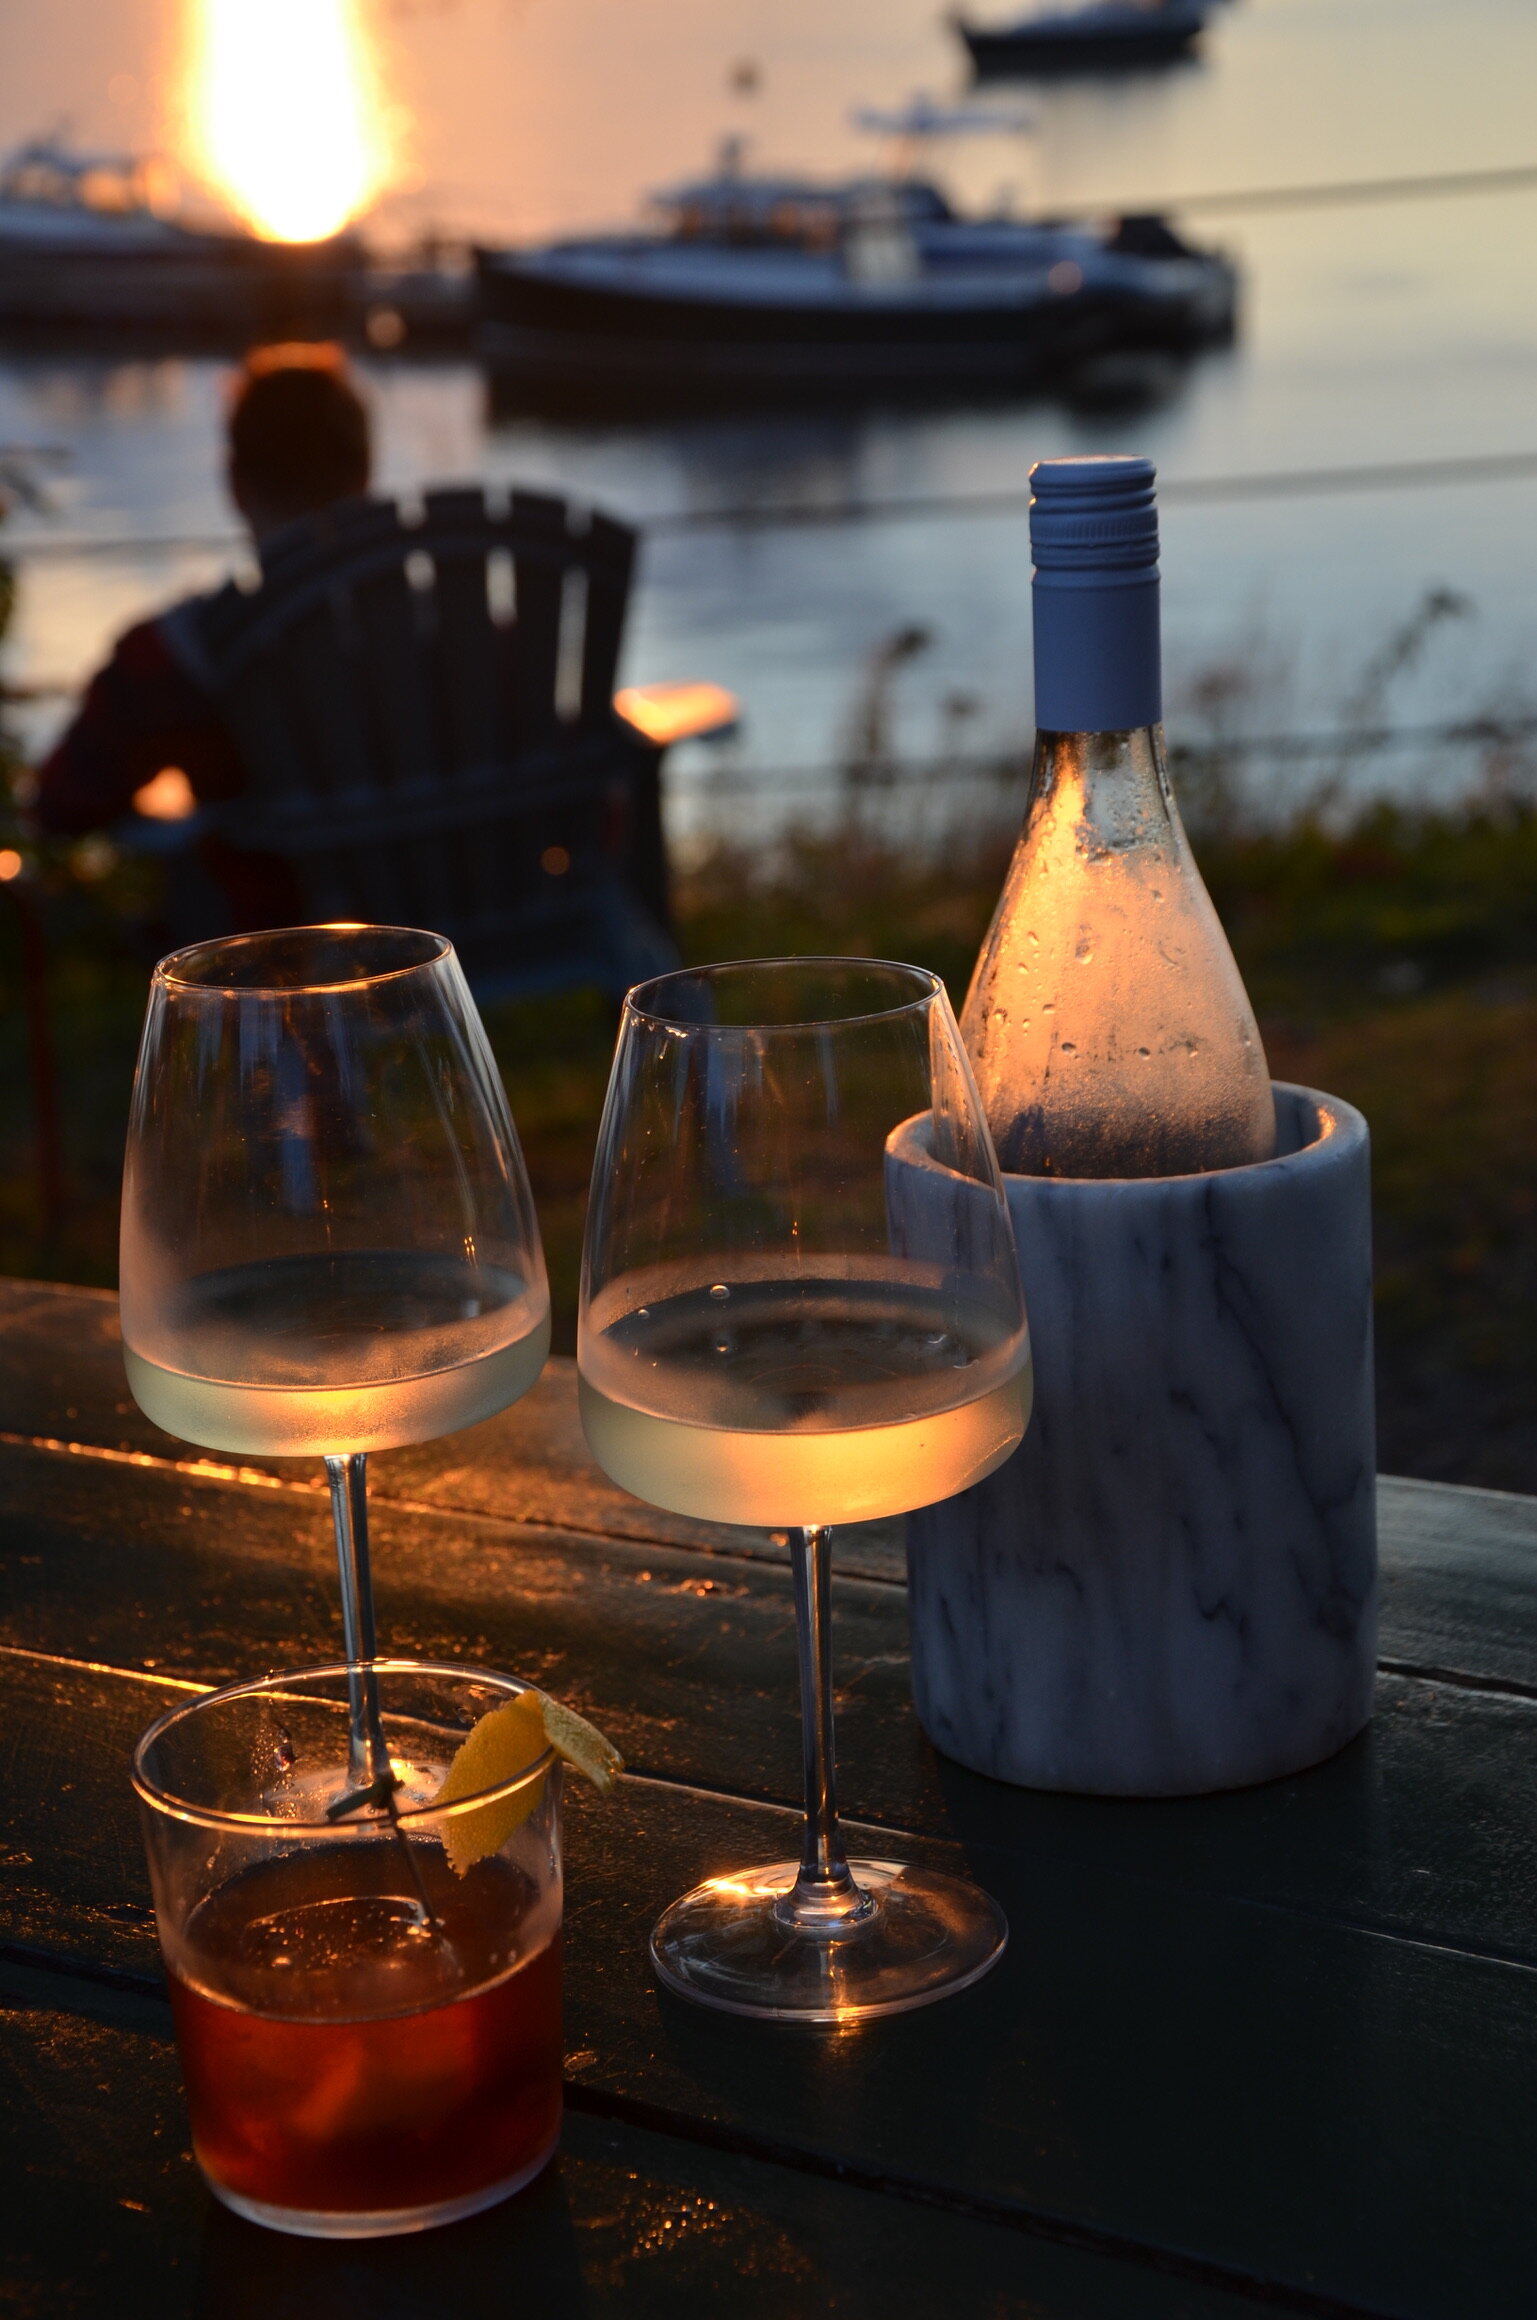 where-to-eat-in-Bar-harbor- (Copy)